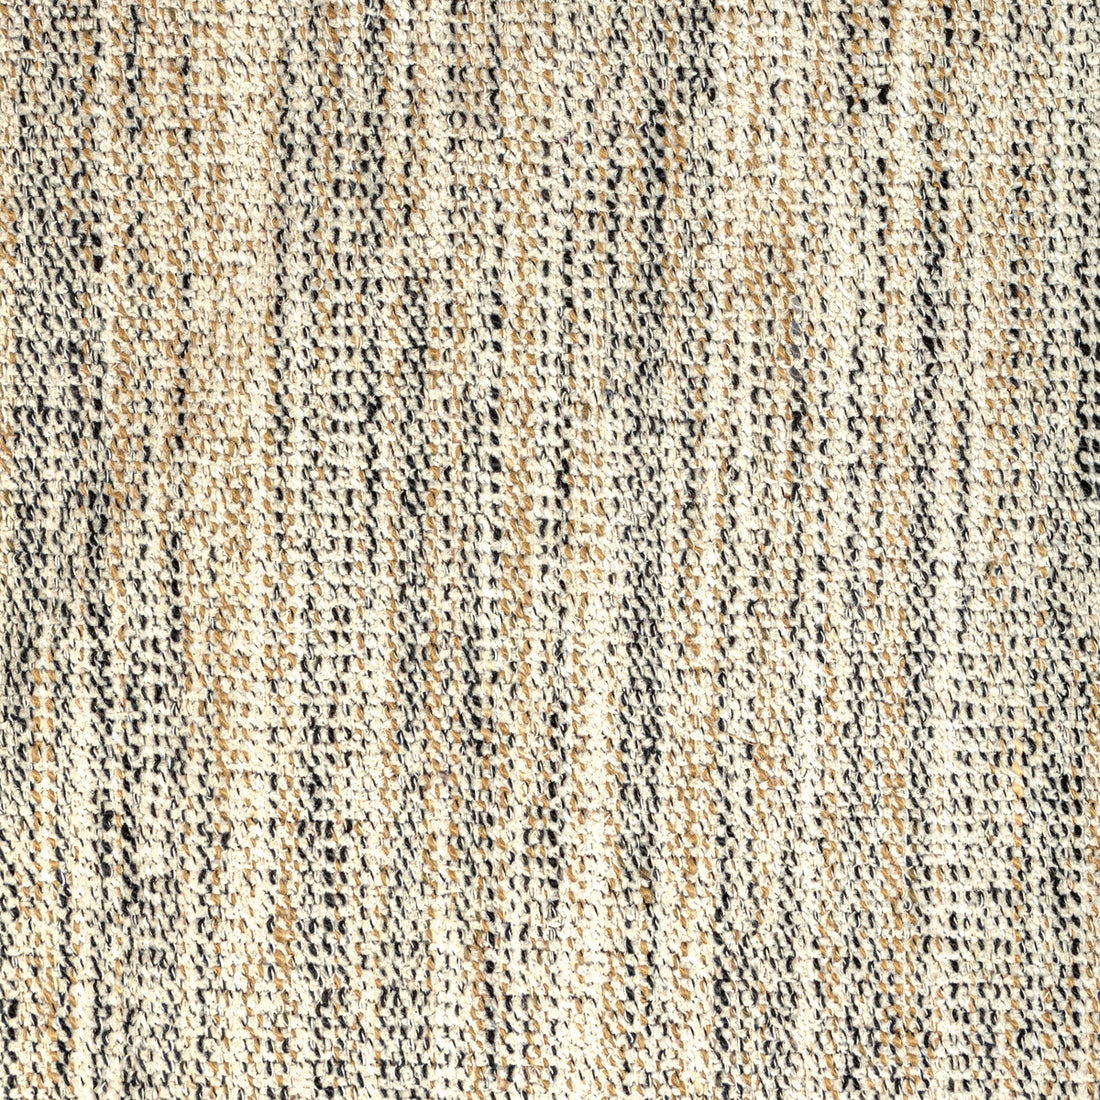 Delfino fabric in sandbar color - pattern 36748.411.0 - by Kravet Contract in the Refined Textures Performance Crypton collection